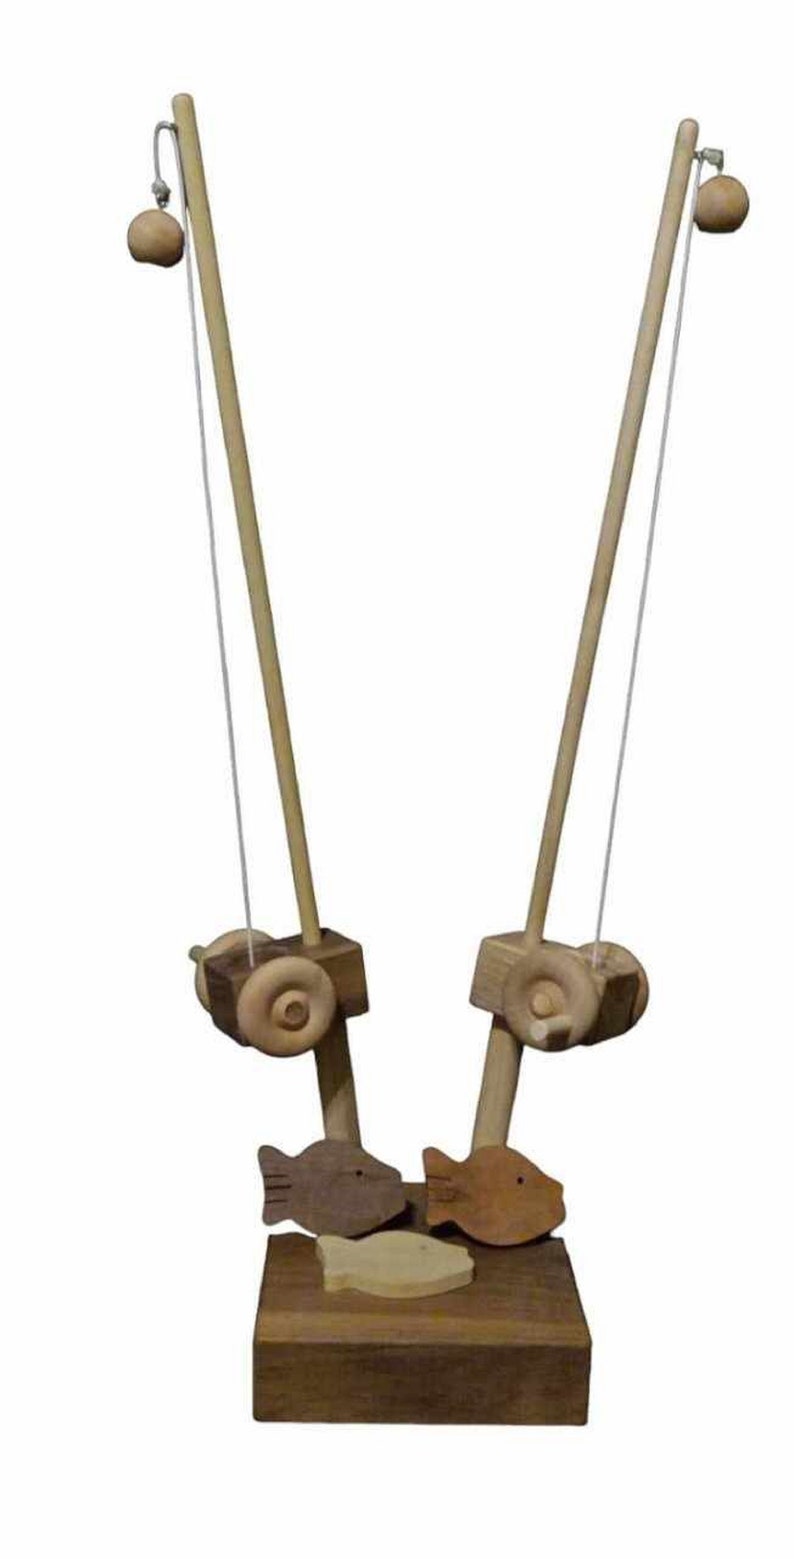 Organic Wooden Toy Fishing Pole With 3 Fish image 1